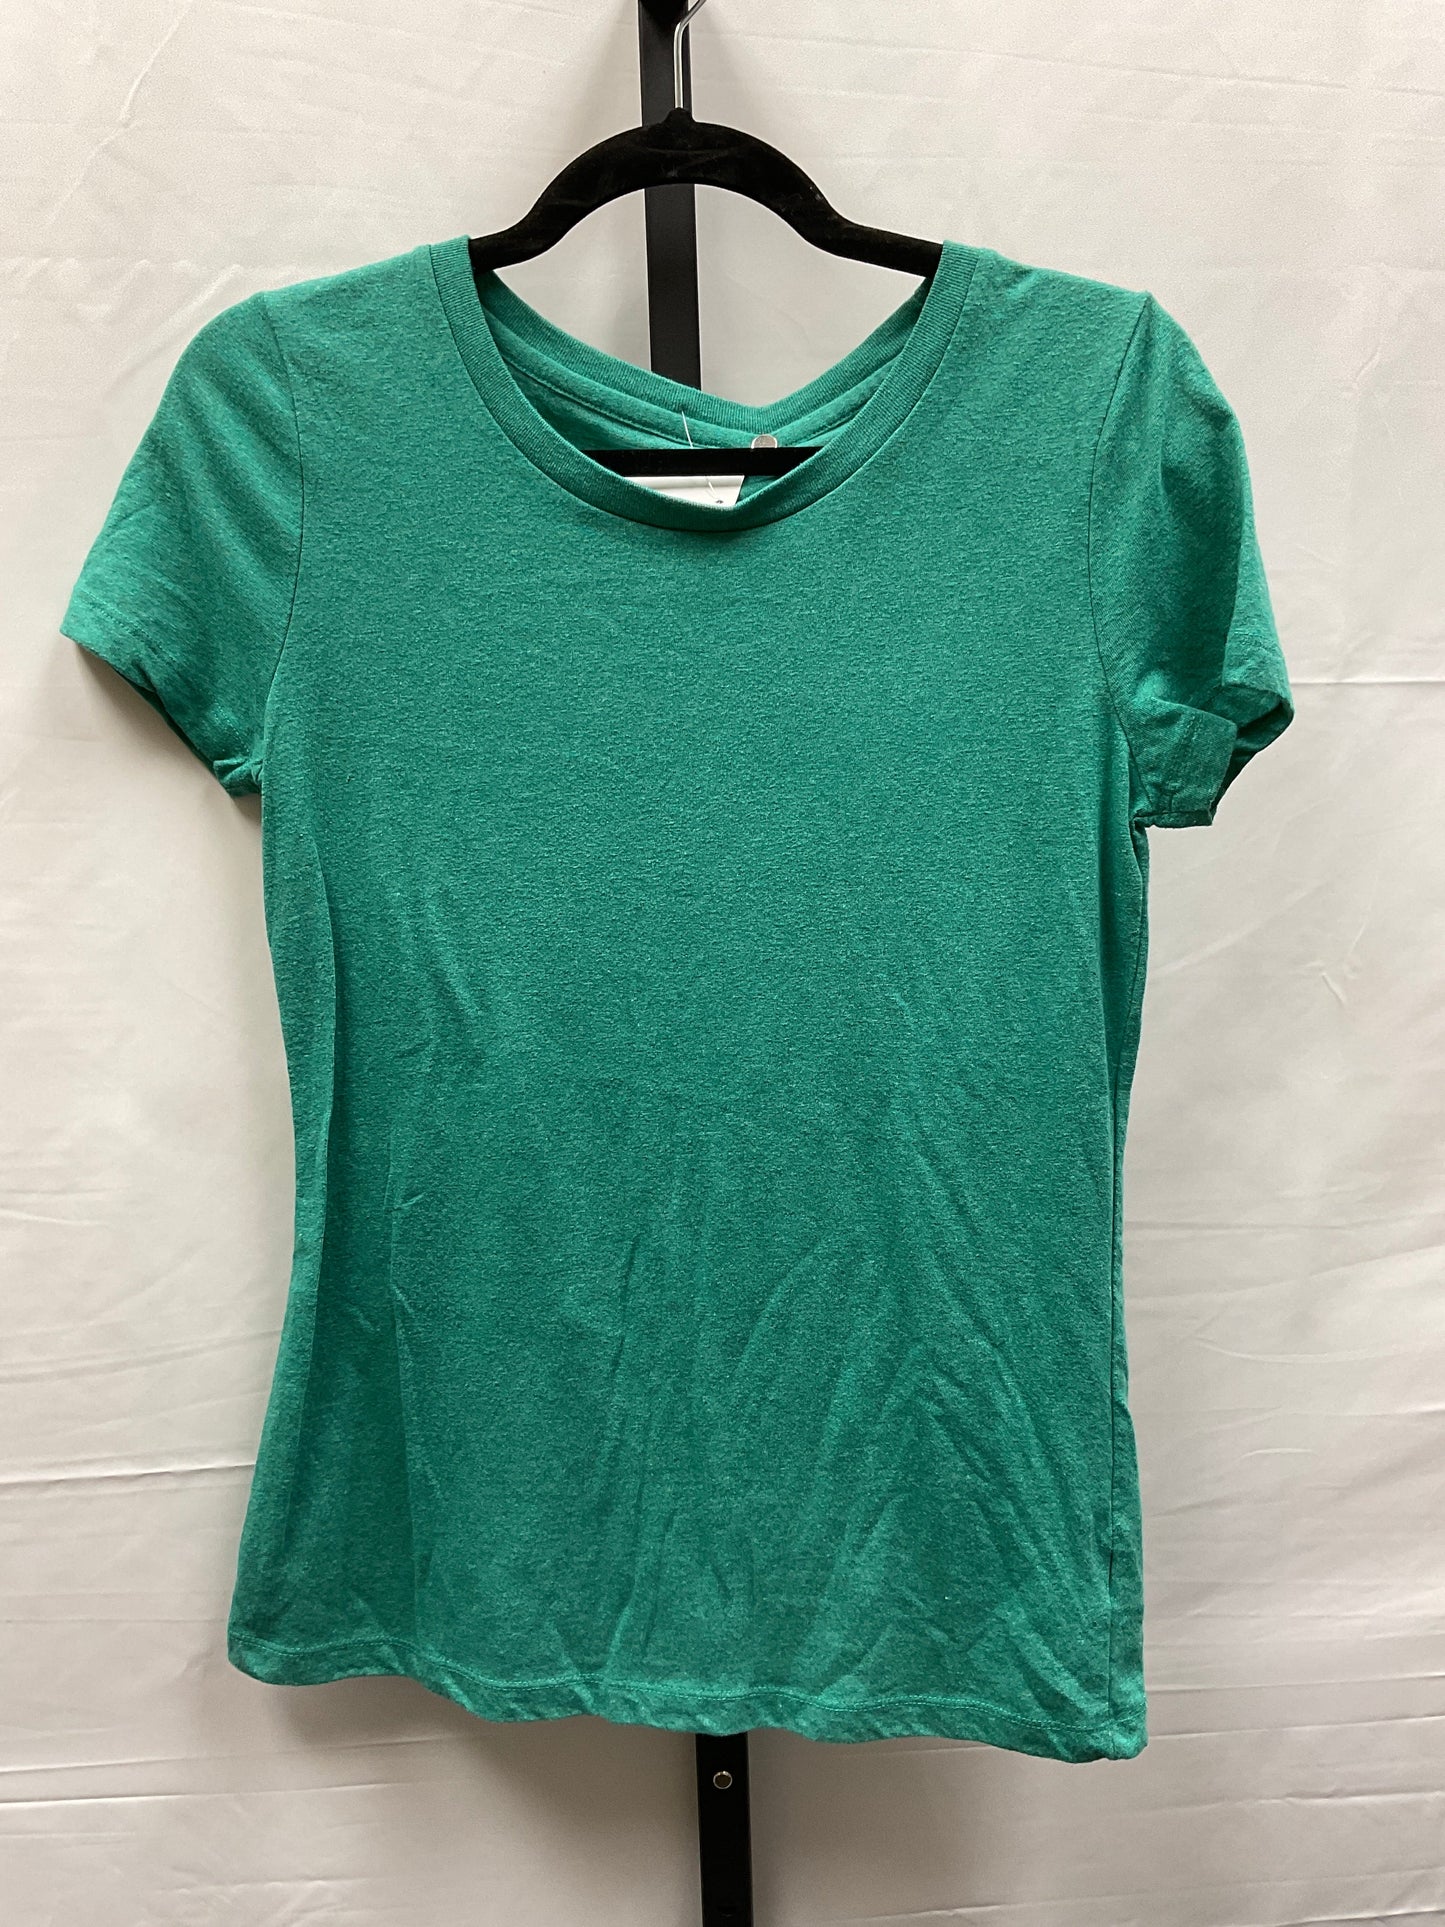 Green Top Short Sleeve Basic Mossimo, Size M